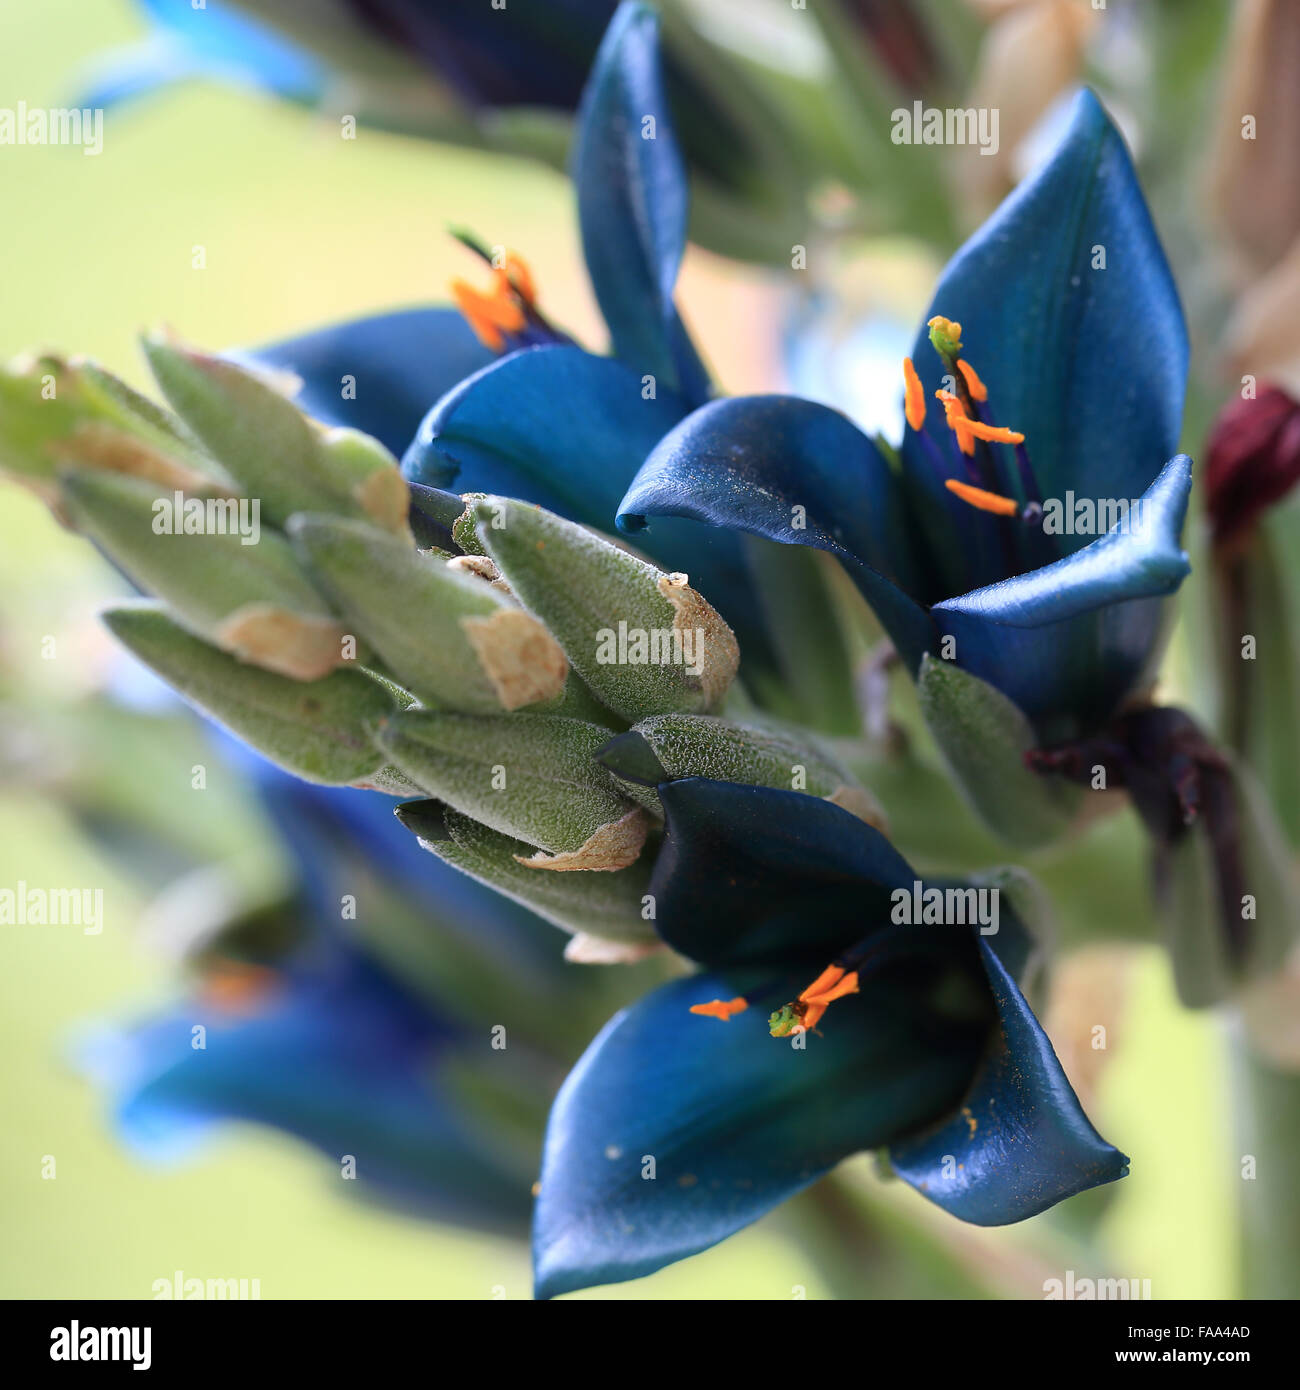 Puya alpestris flowering in the Morrab Gardens, it is a bromeliad native to the Chilean Andes. Stock Photo